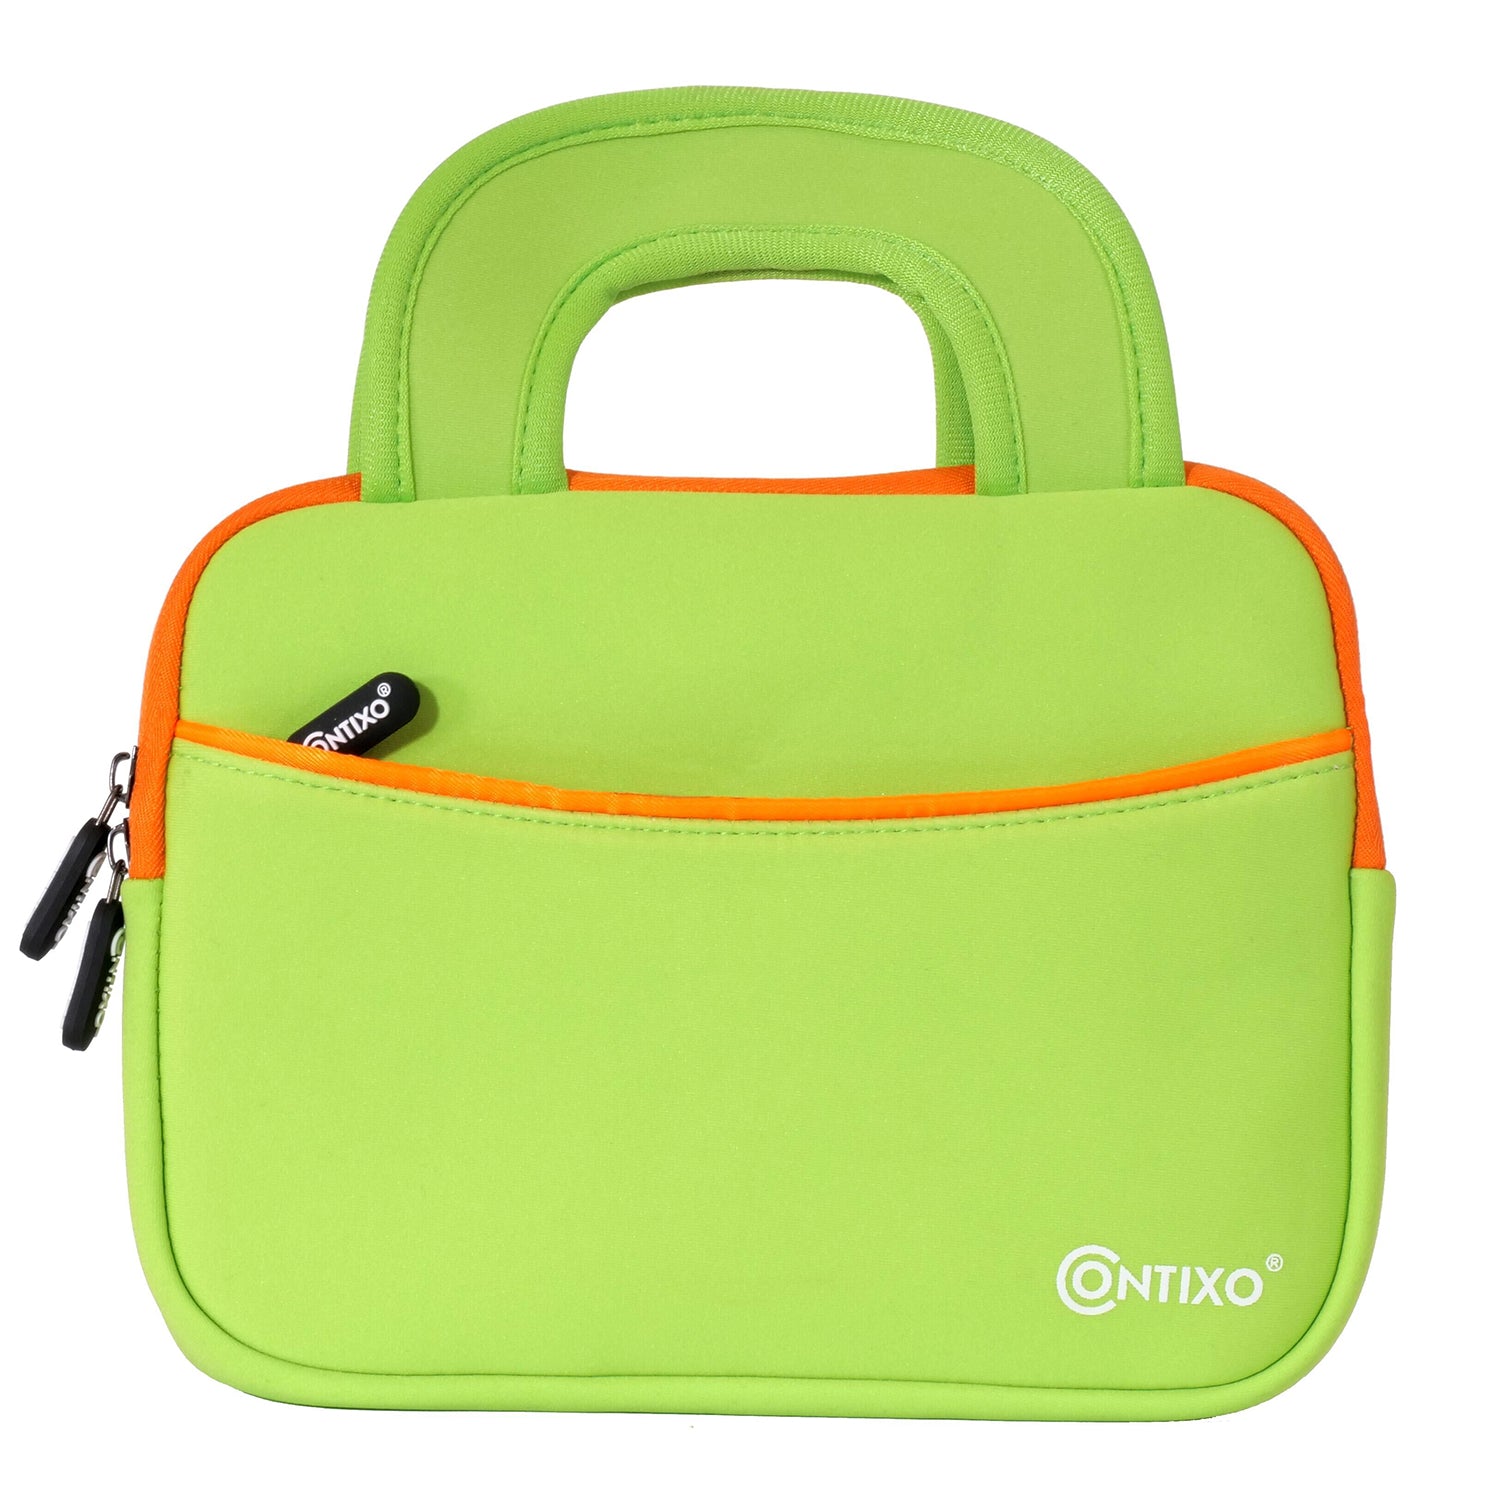 Contixo Protective Carrying Bag Sleeve Case for 7" Tablets